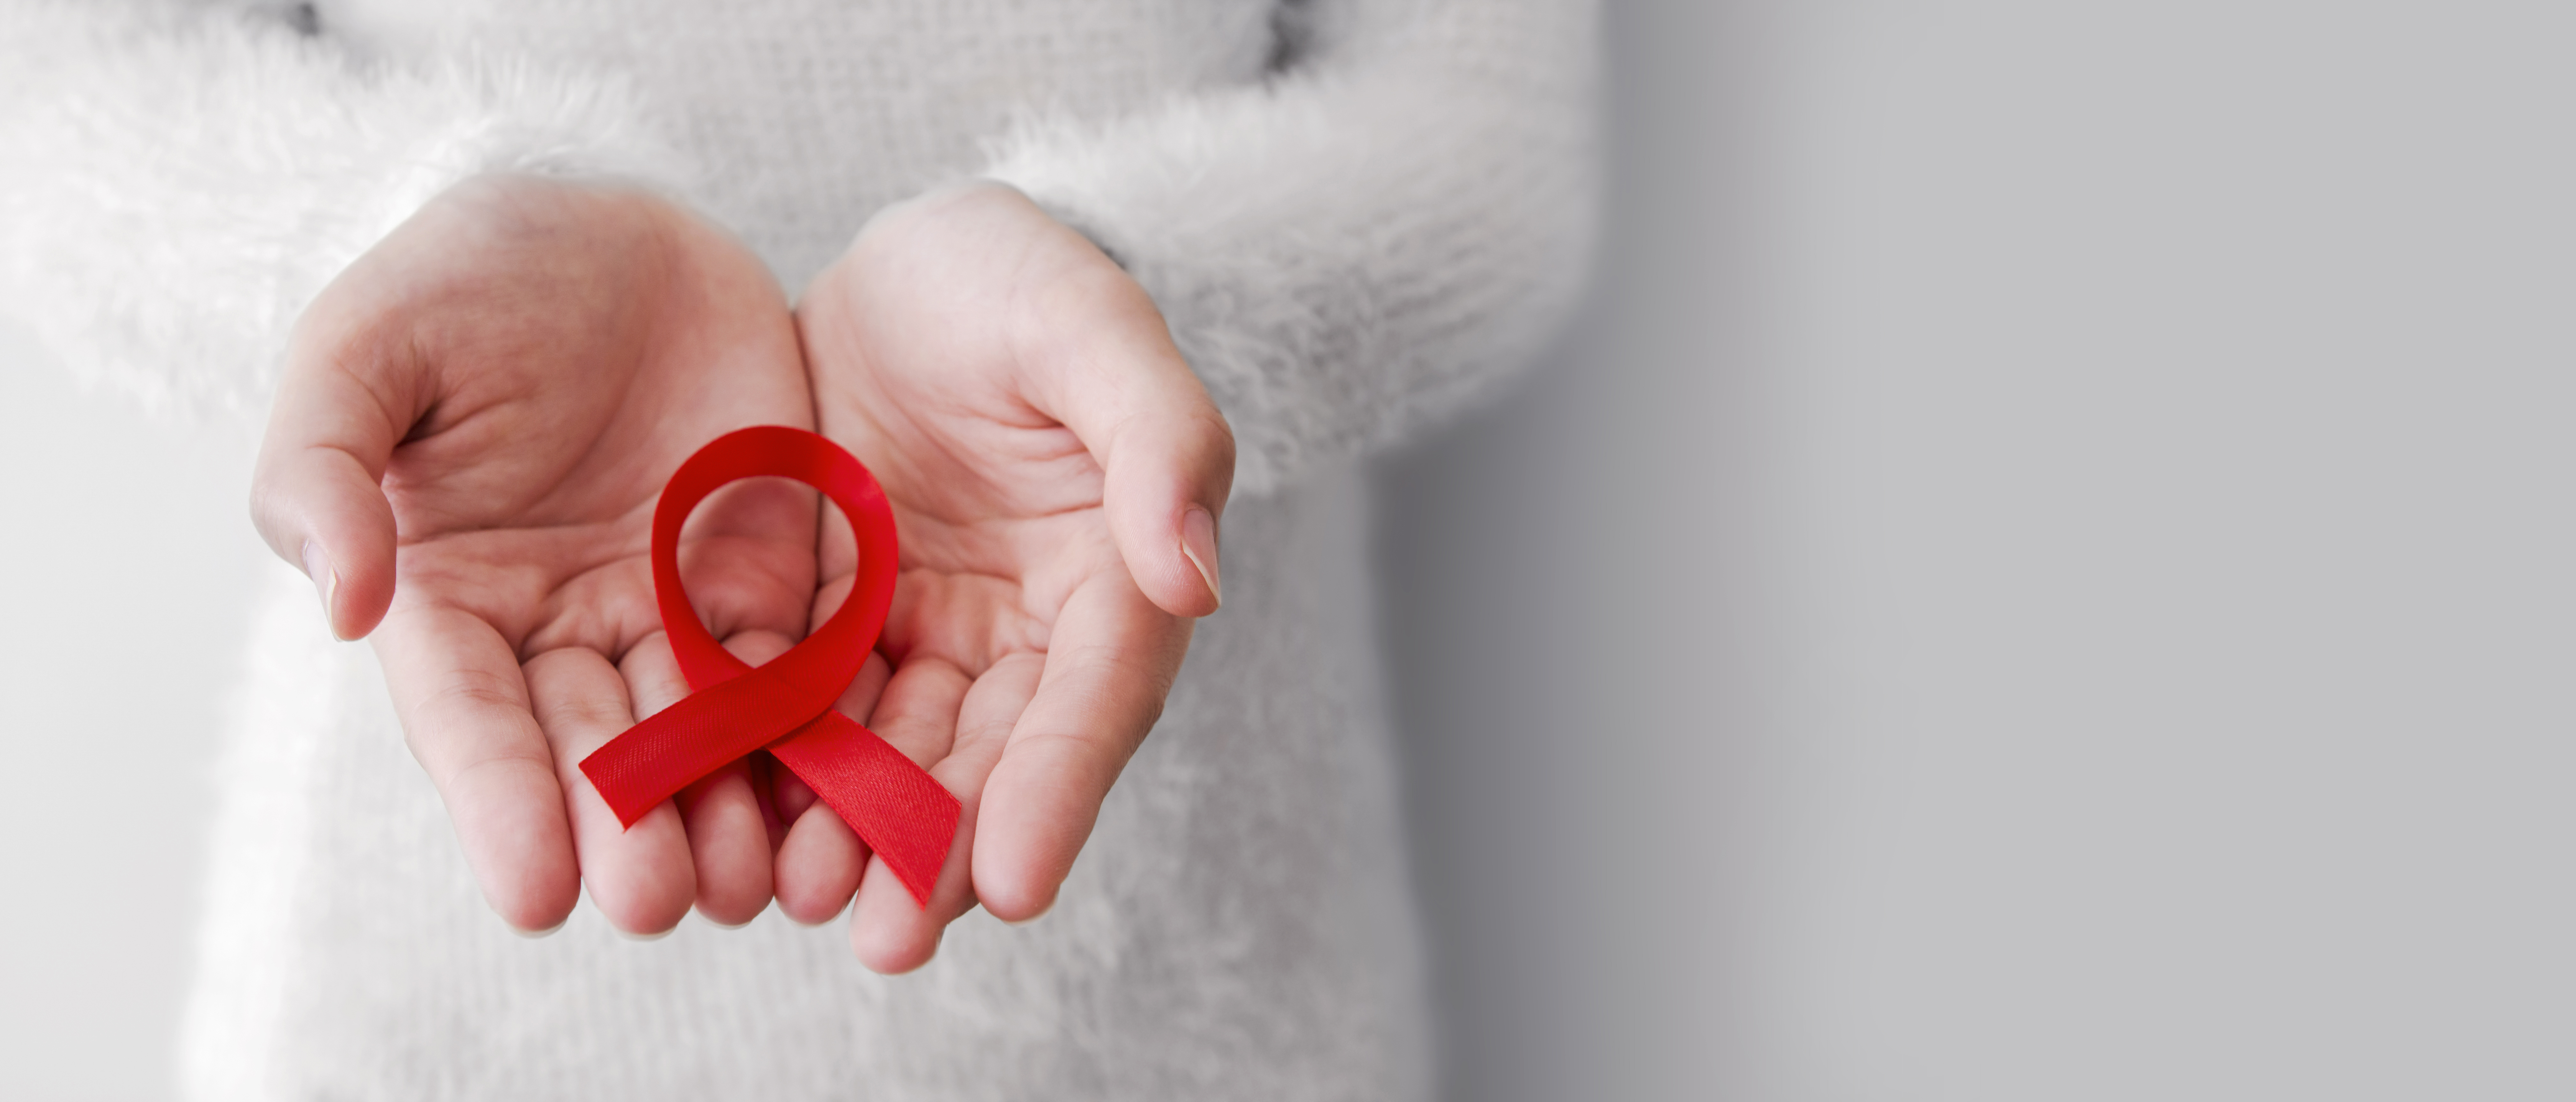 World AIDS Day: How You Can Help